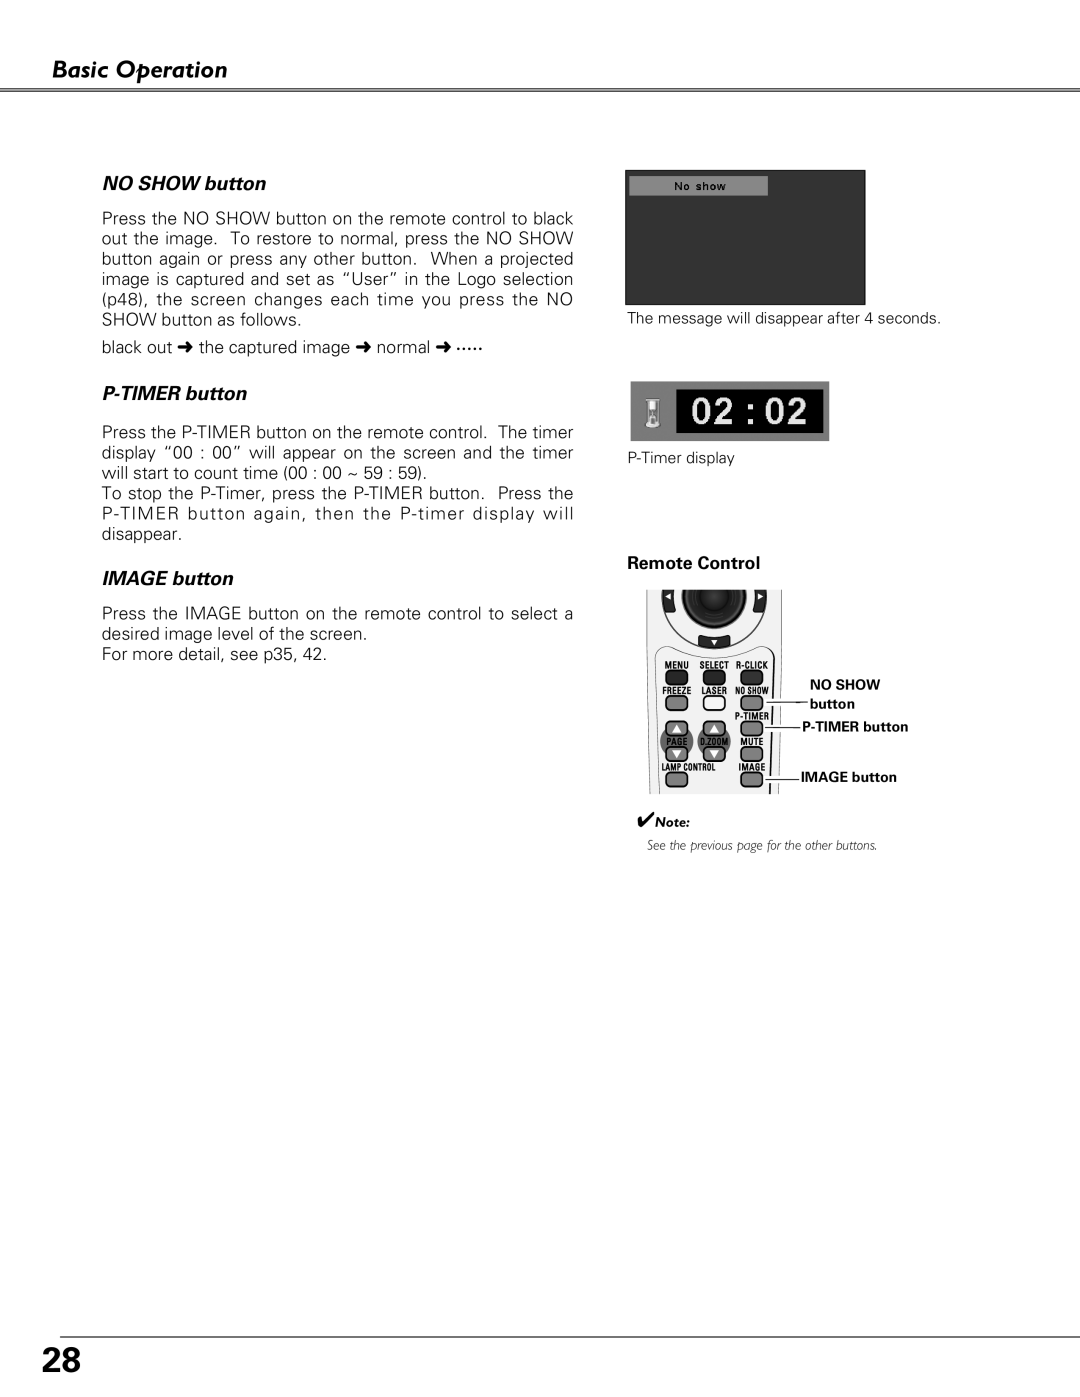 Eiki LC-XB27 owner manual NO SHOW button, P-TIMER button, IMAGE button, Basic Operation, Remote Control 